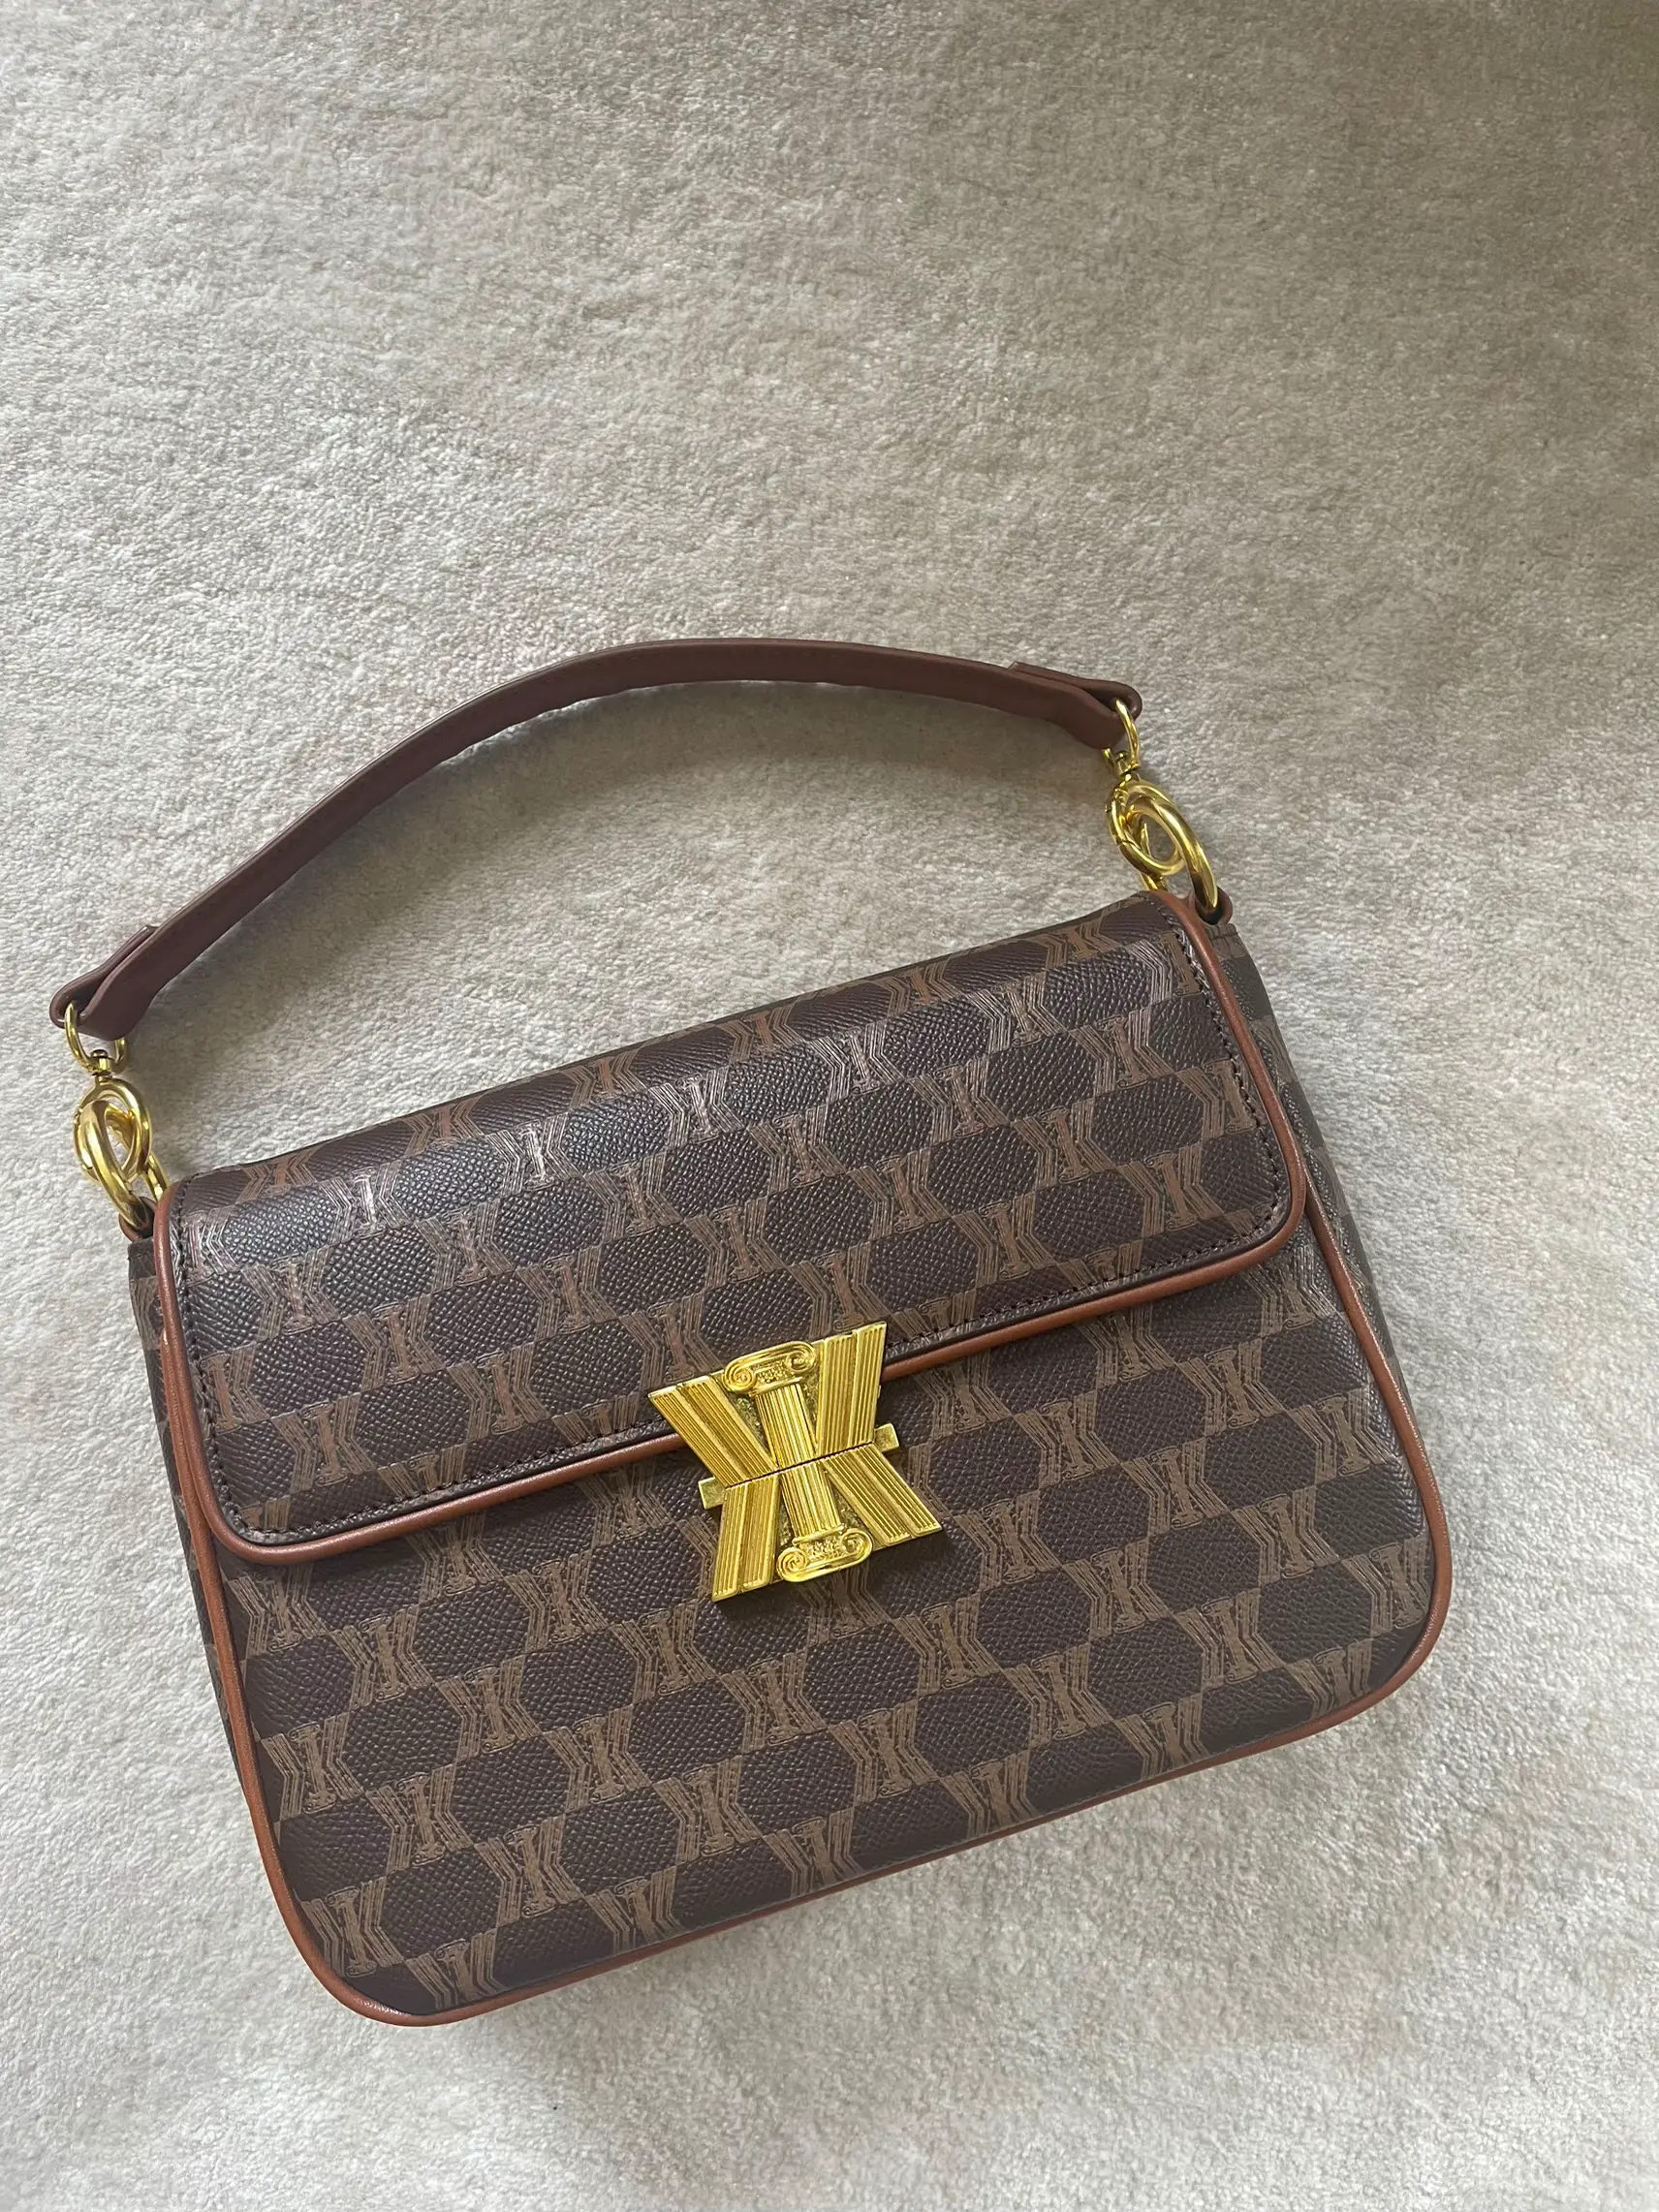 The Incredible Louis Vuitton Dupes and bags alternatives - Dupes